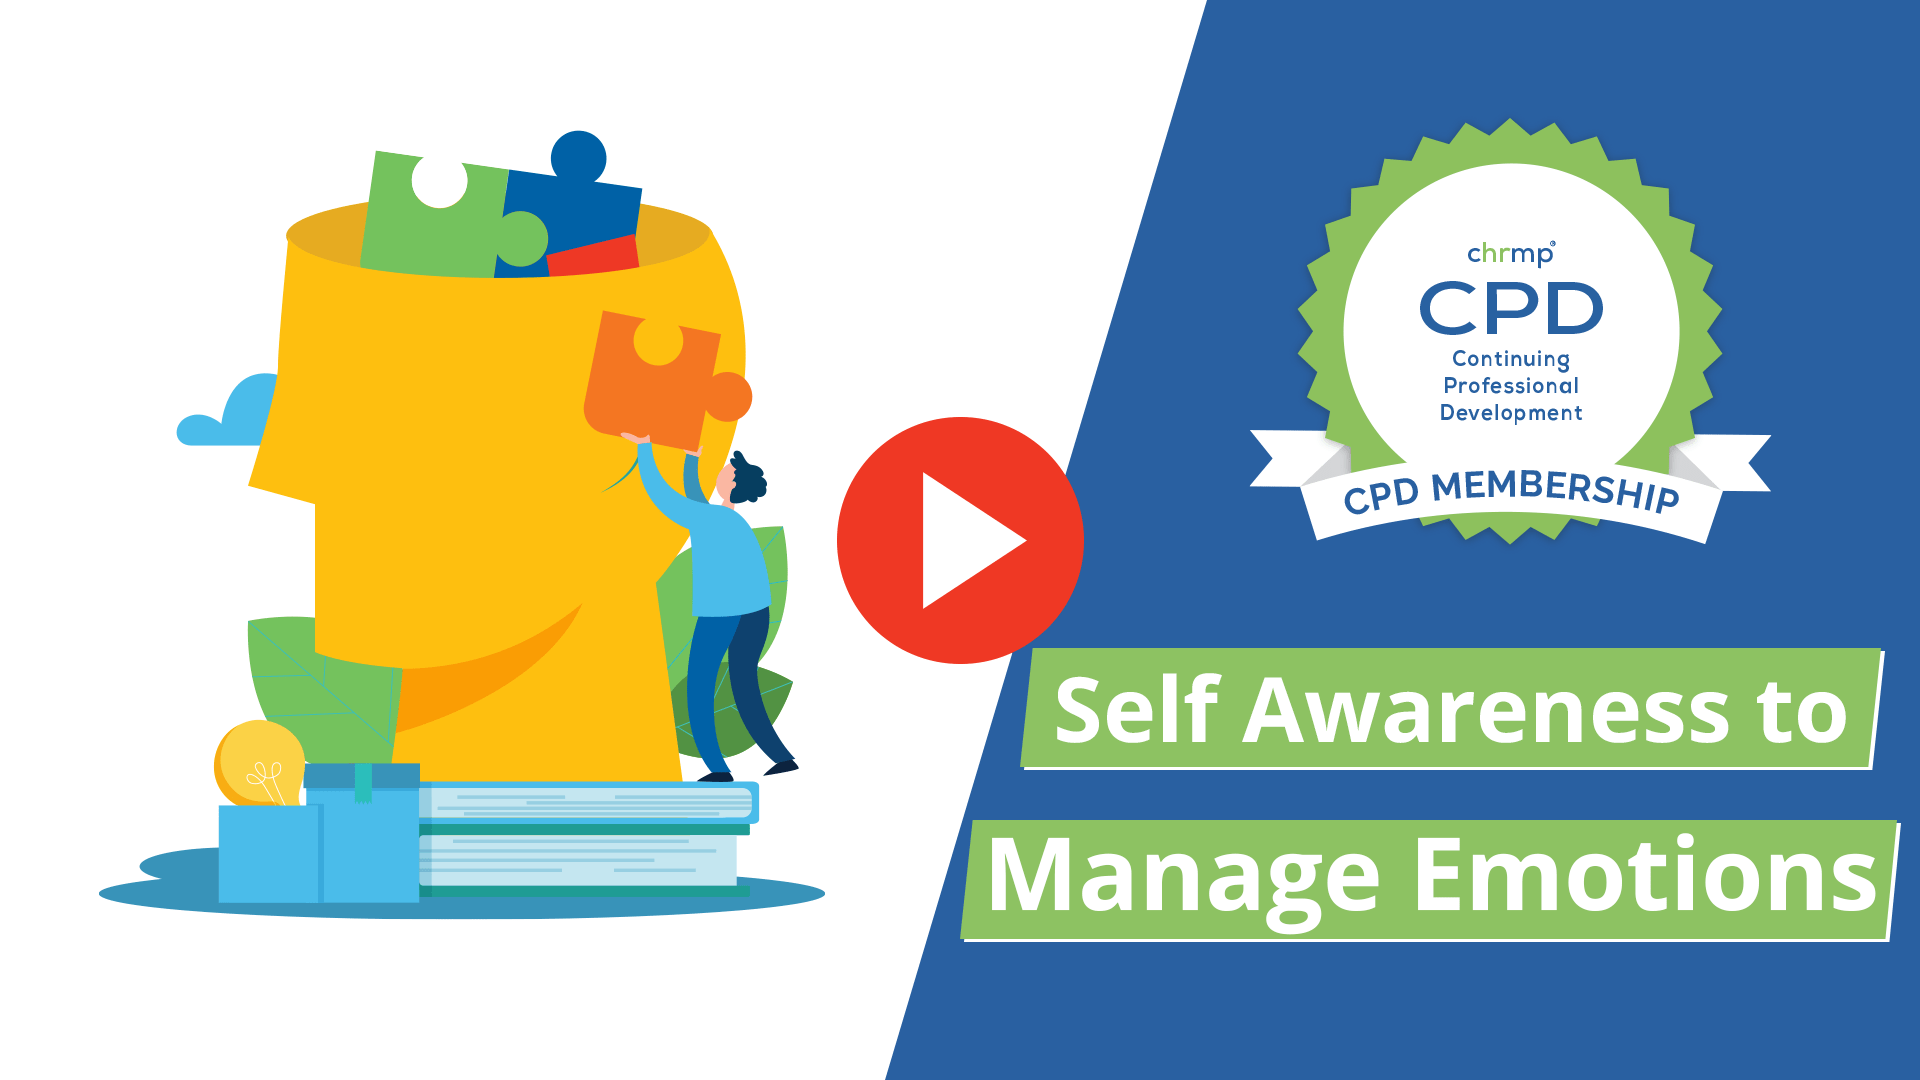 Self Awareness to manage Emotions